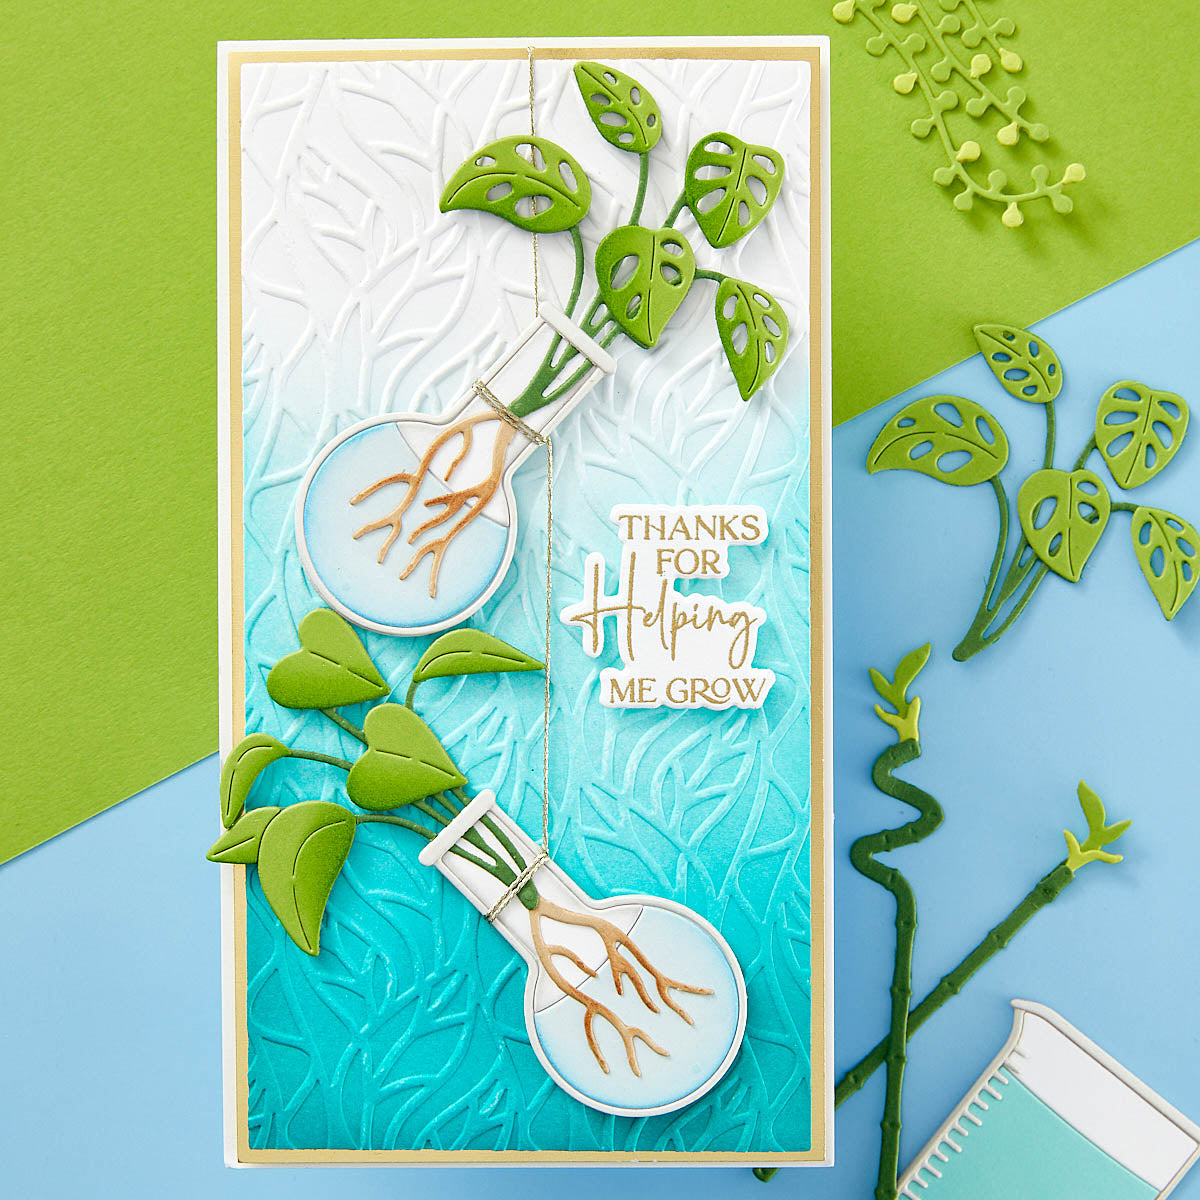 Spellbinders - Propagation Garden Sentiments Stamp & Die Cutting Set from the Propagation Garden Collection by Annie Williams